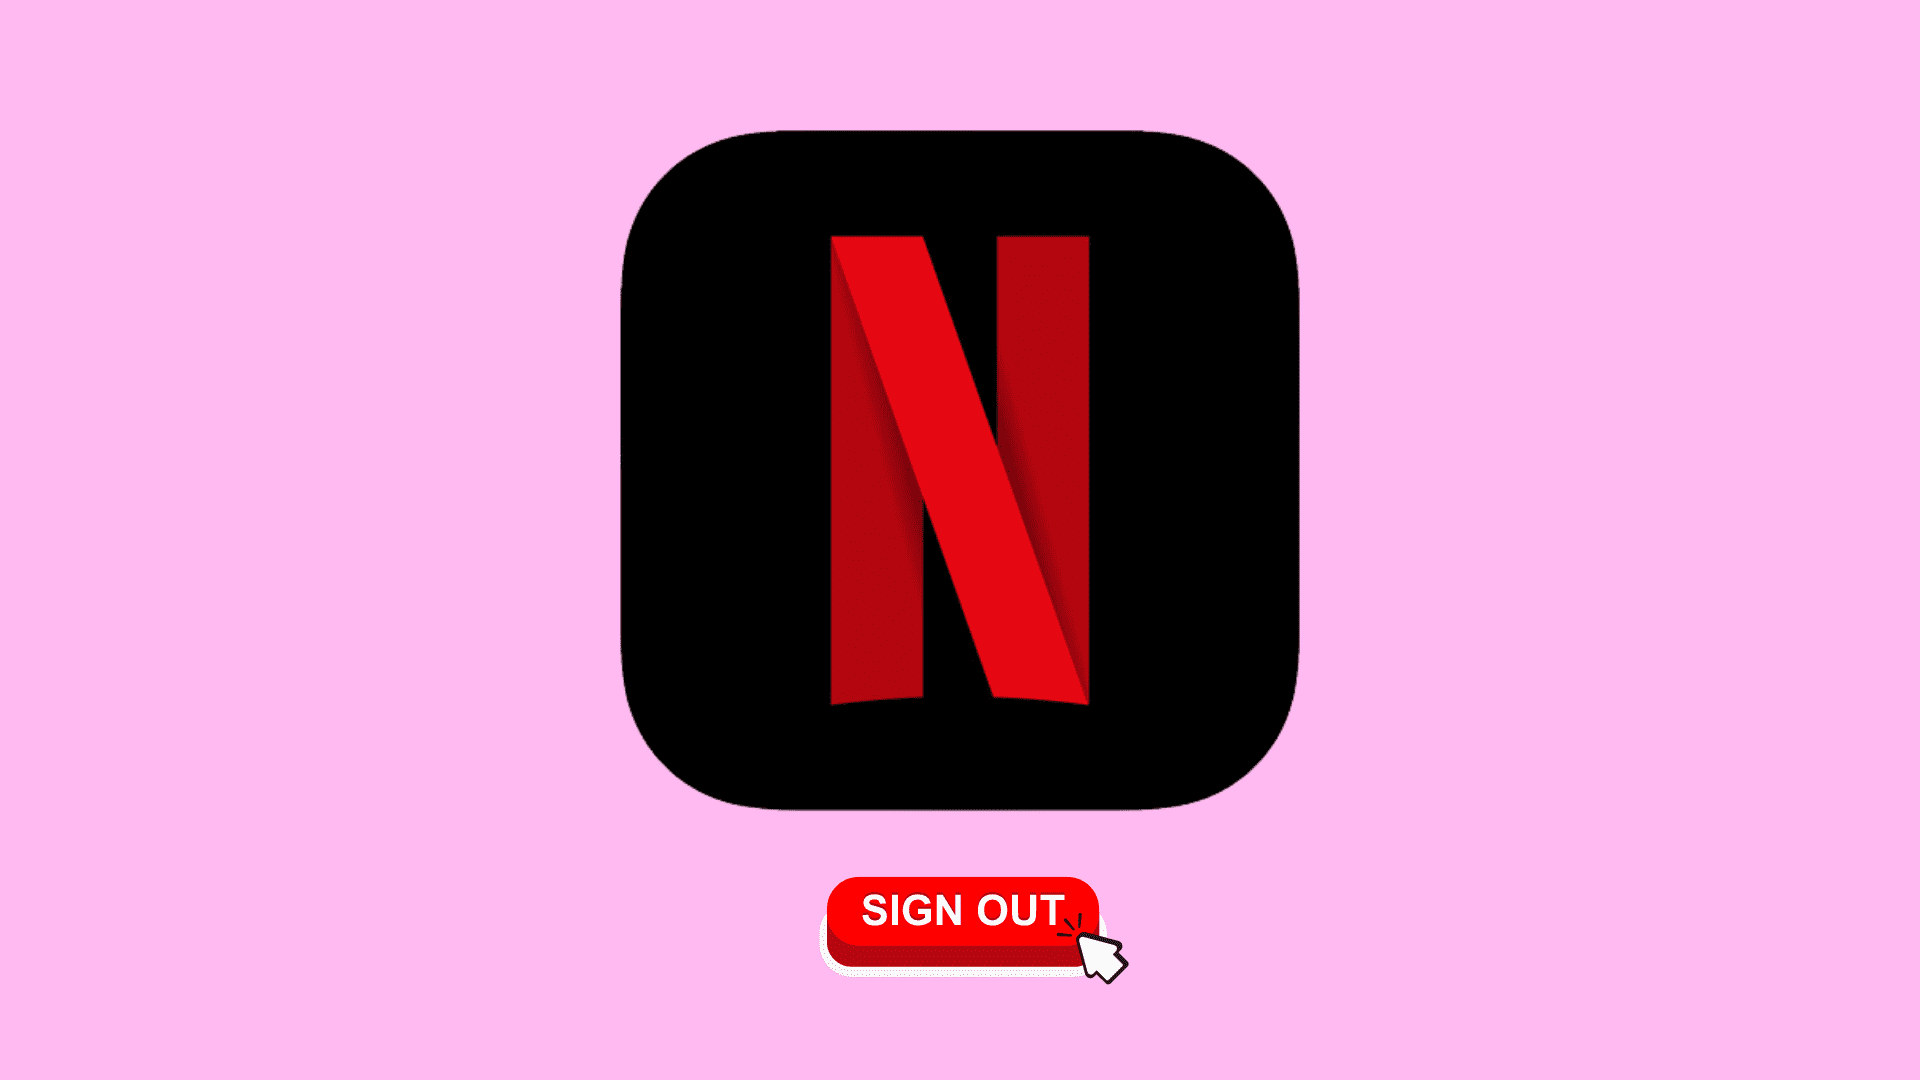 Sign out of Netflix